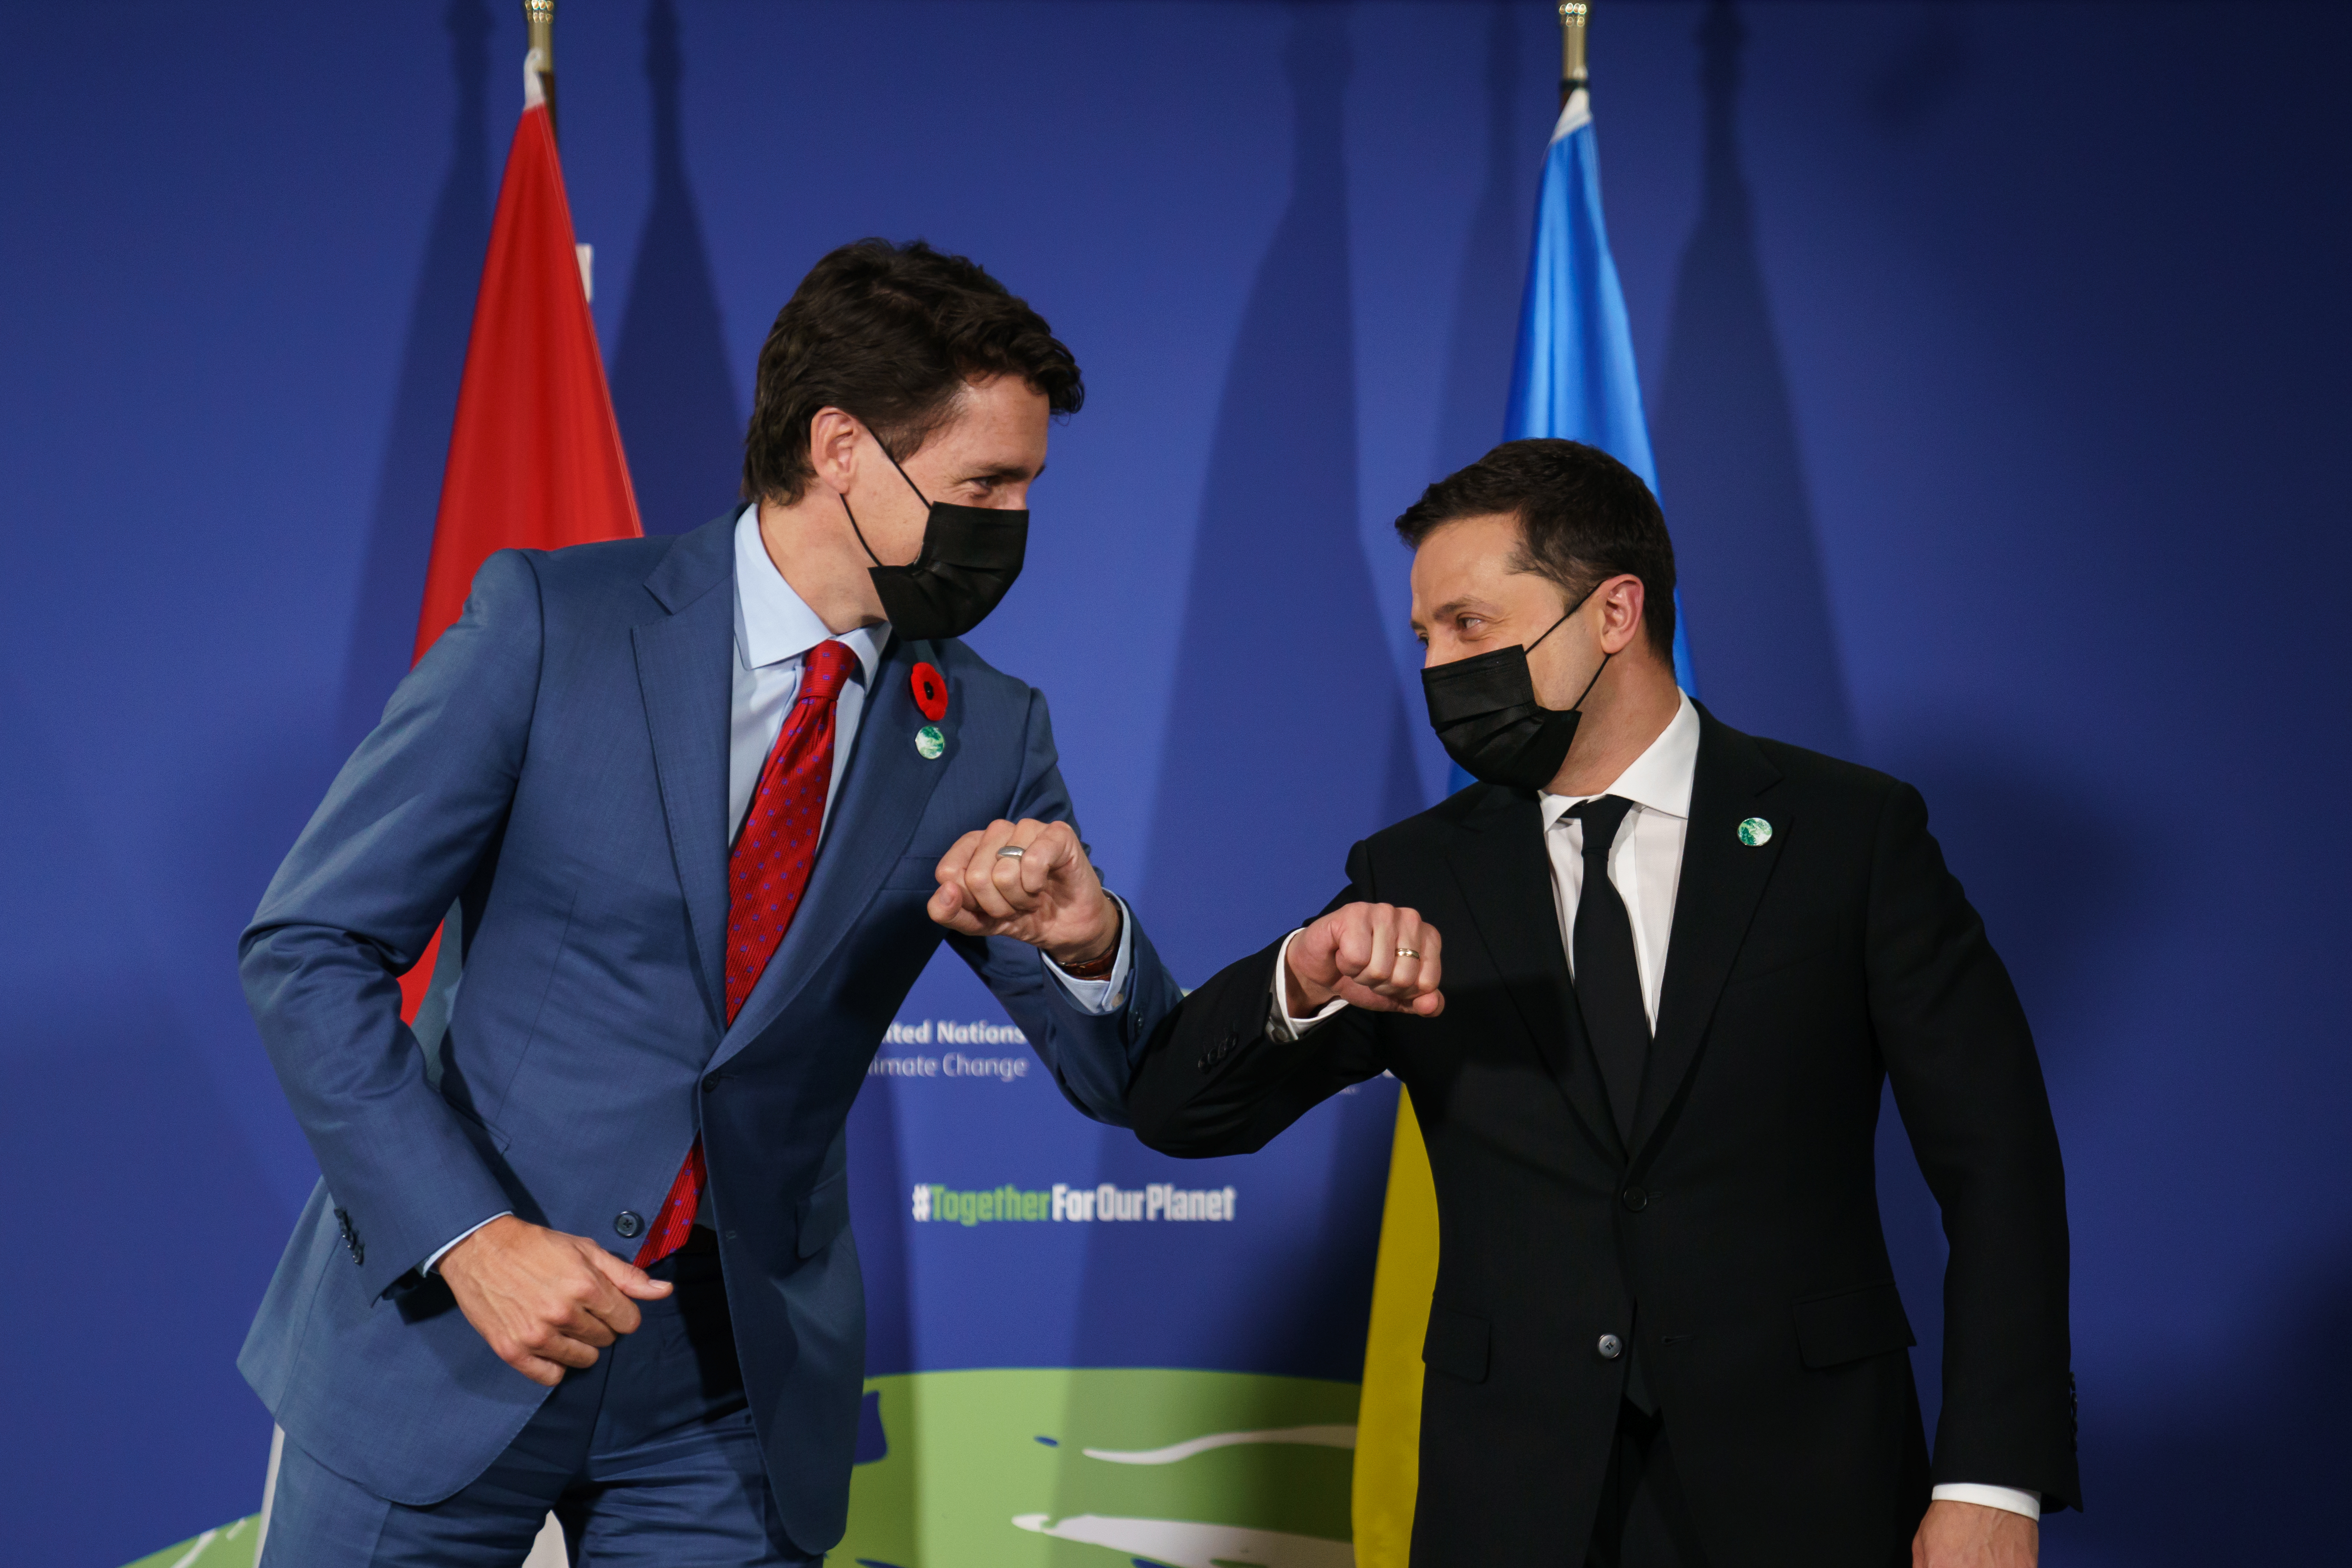 Prime Minister Justin Trudeau touches elbows with the President of the Ukraine, Volodymyr Zelenskyy, in Glasgow.